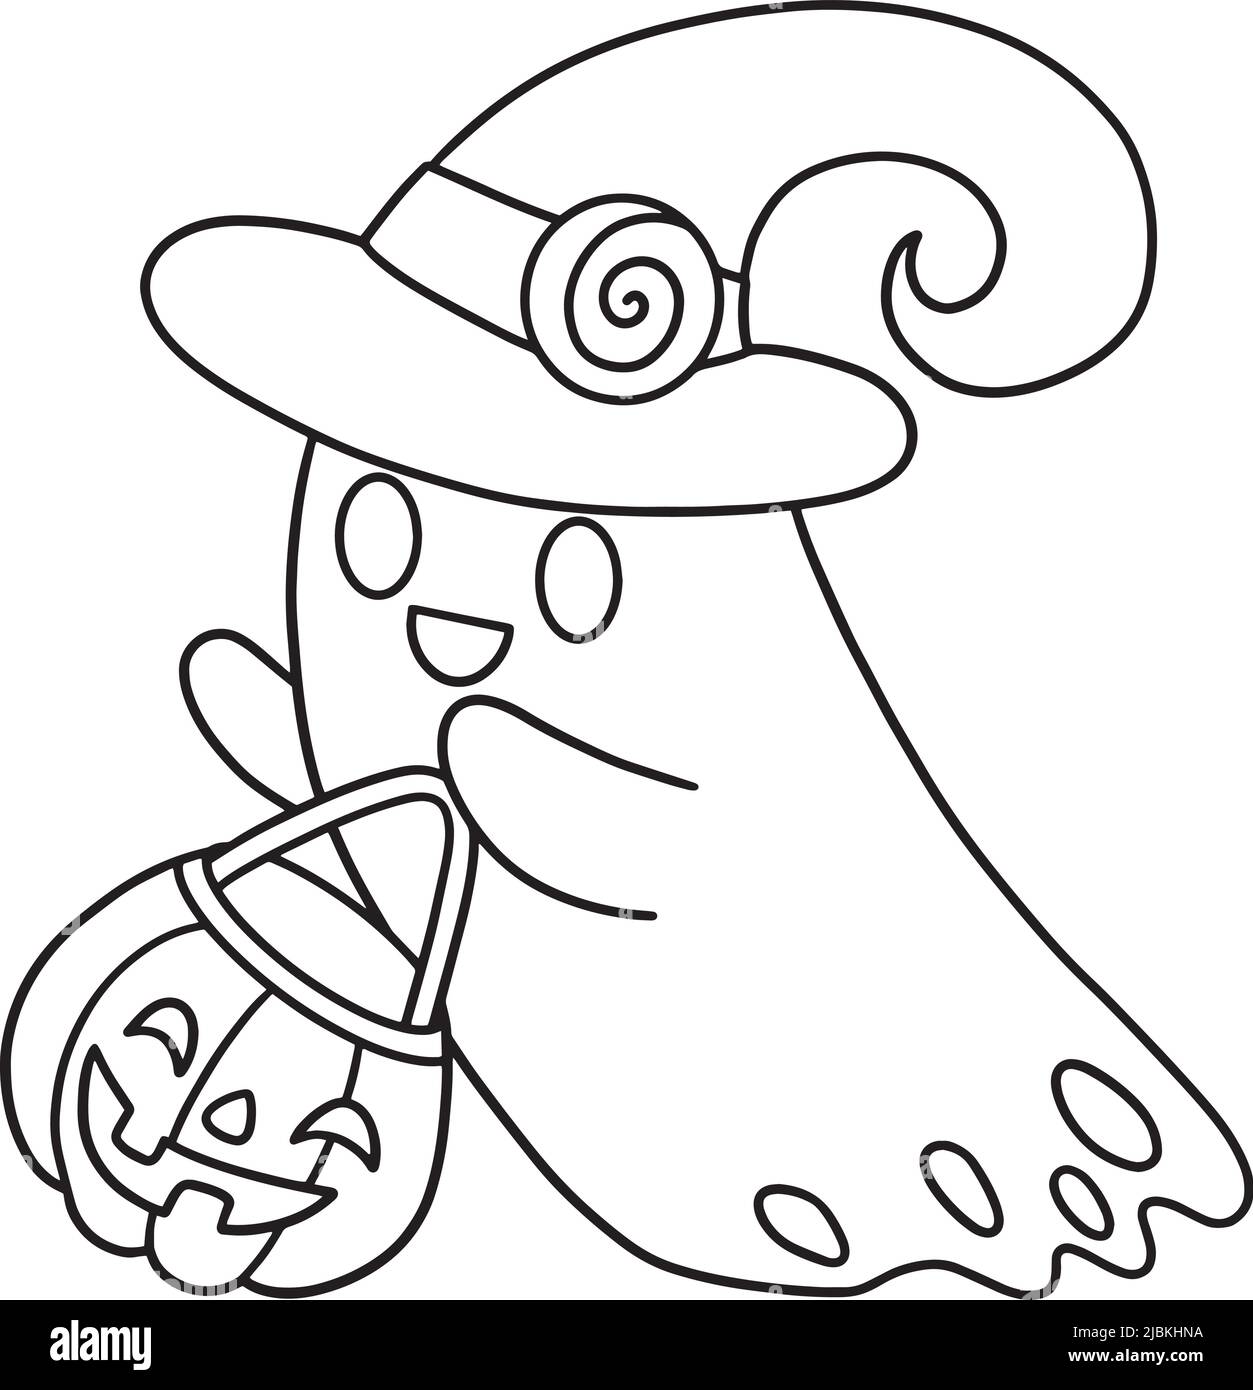 Ghost halloween isolated coloring page for kids stock vector image art